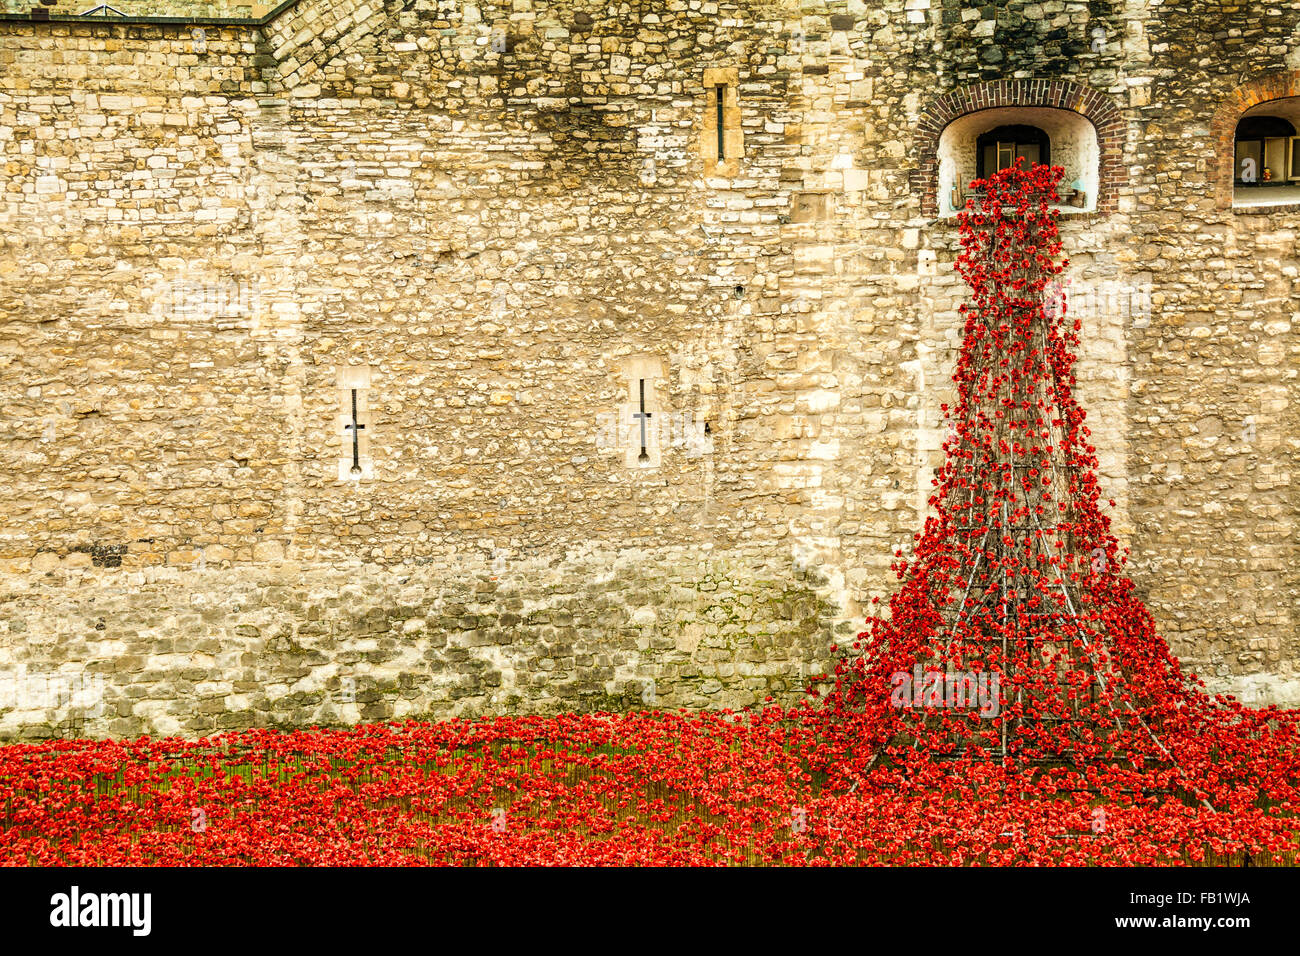 This amazing art installation of over 800000 ceramic poppies at the Tower of London commemorating the 100th anniversary of WW1 Stock Photo